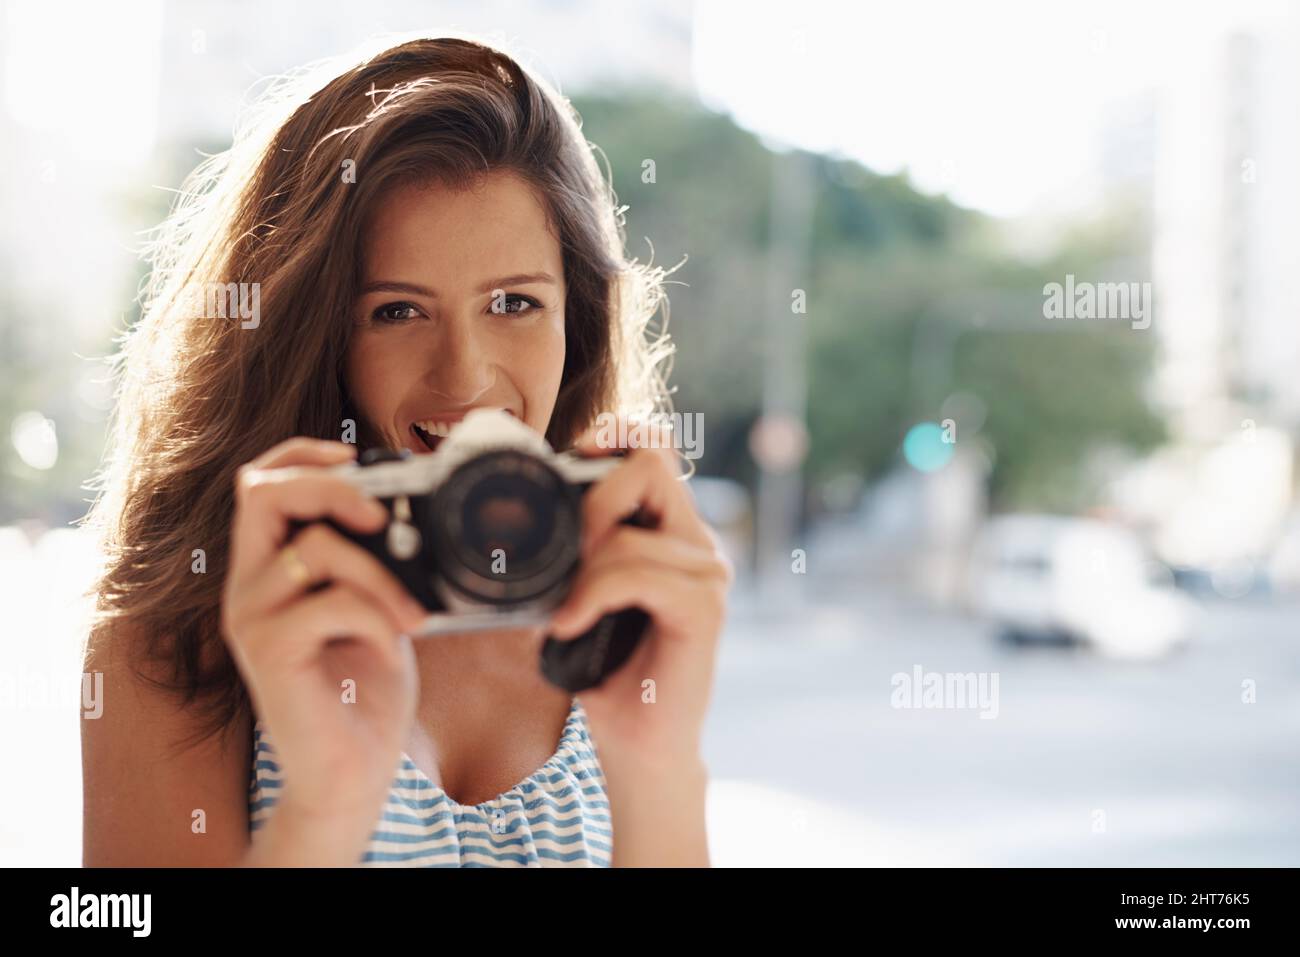 Taking pictures of everything on vacation. Cropped shot of an attractive young woman in an urban setting. Stock Photo